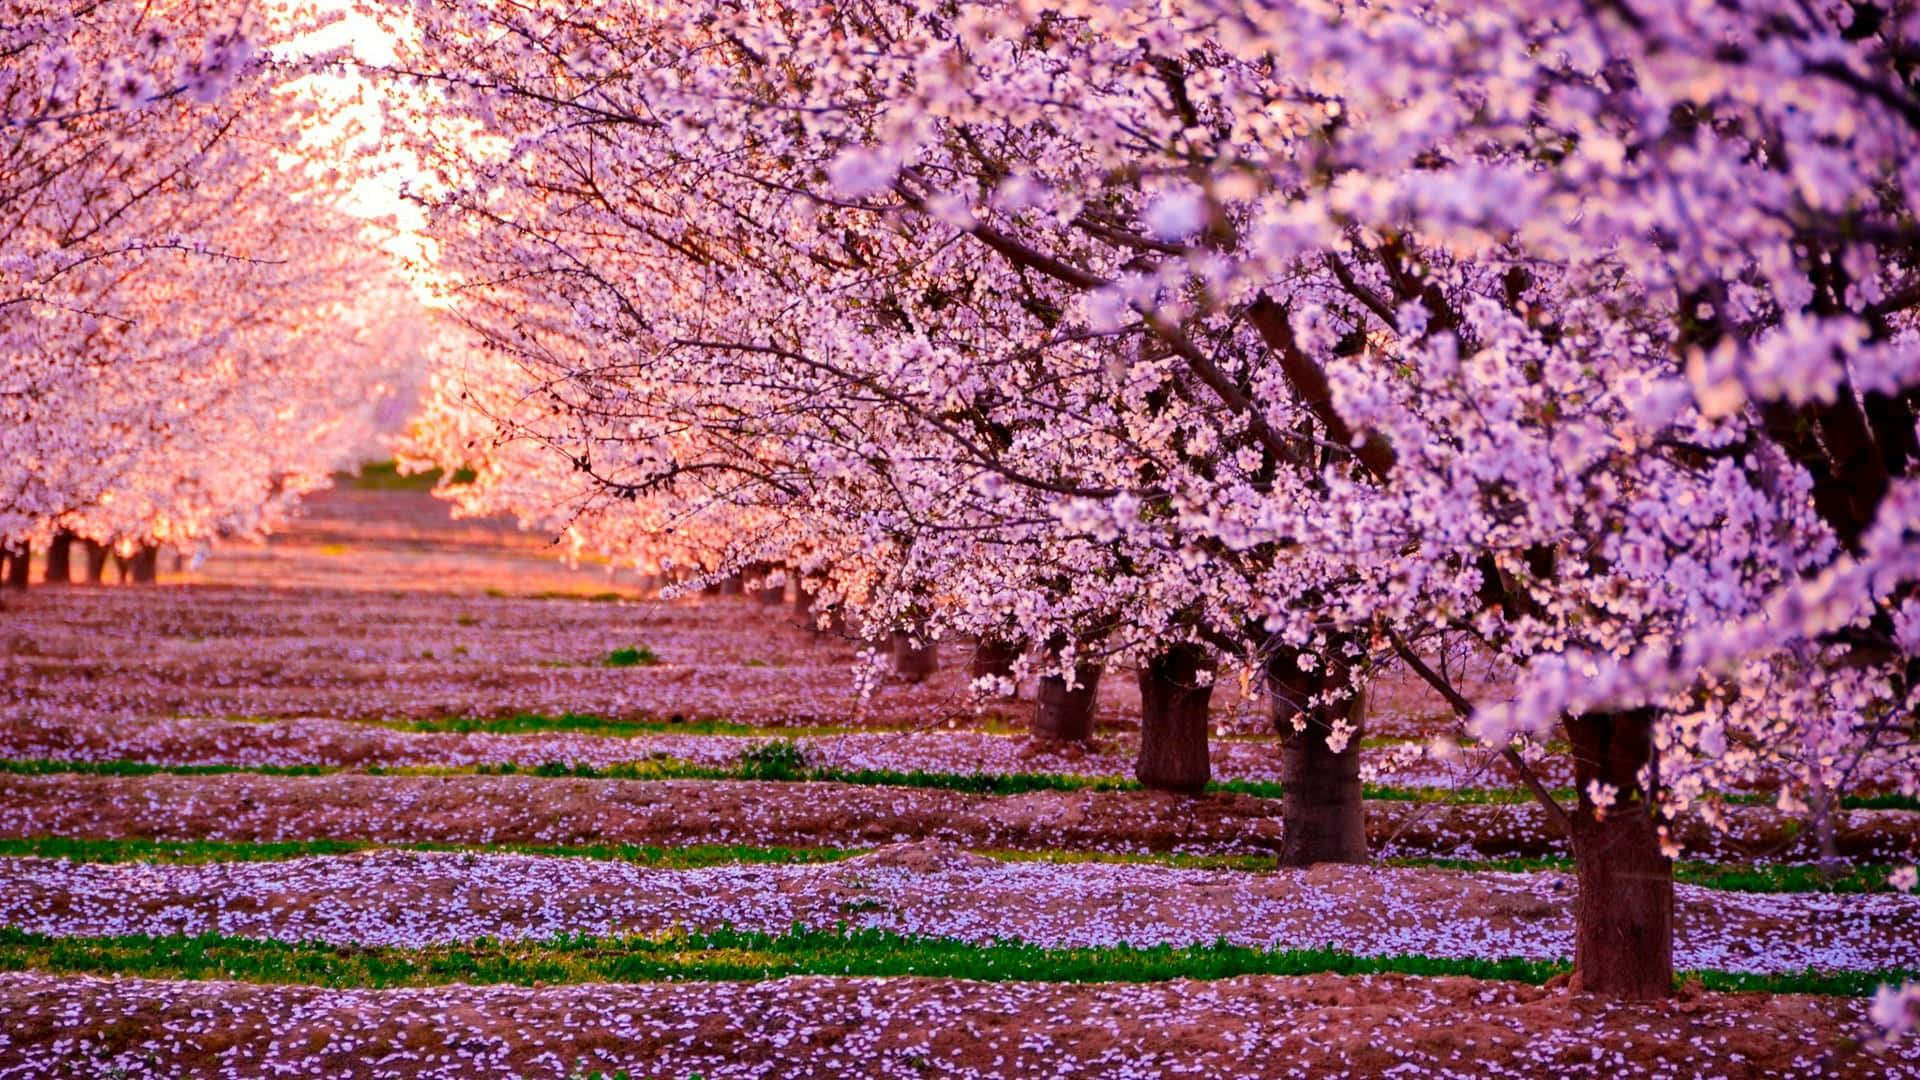 Caption: Magnificent Cherry Blossom Tree in Full Bloom Wallpaper